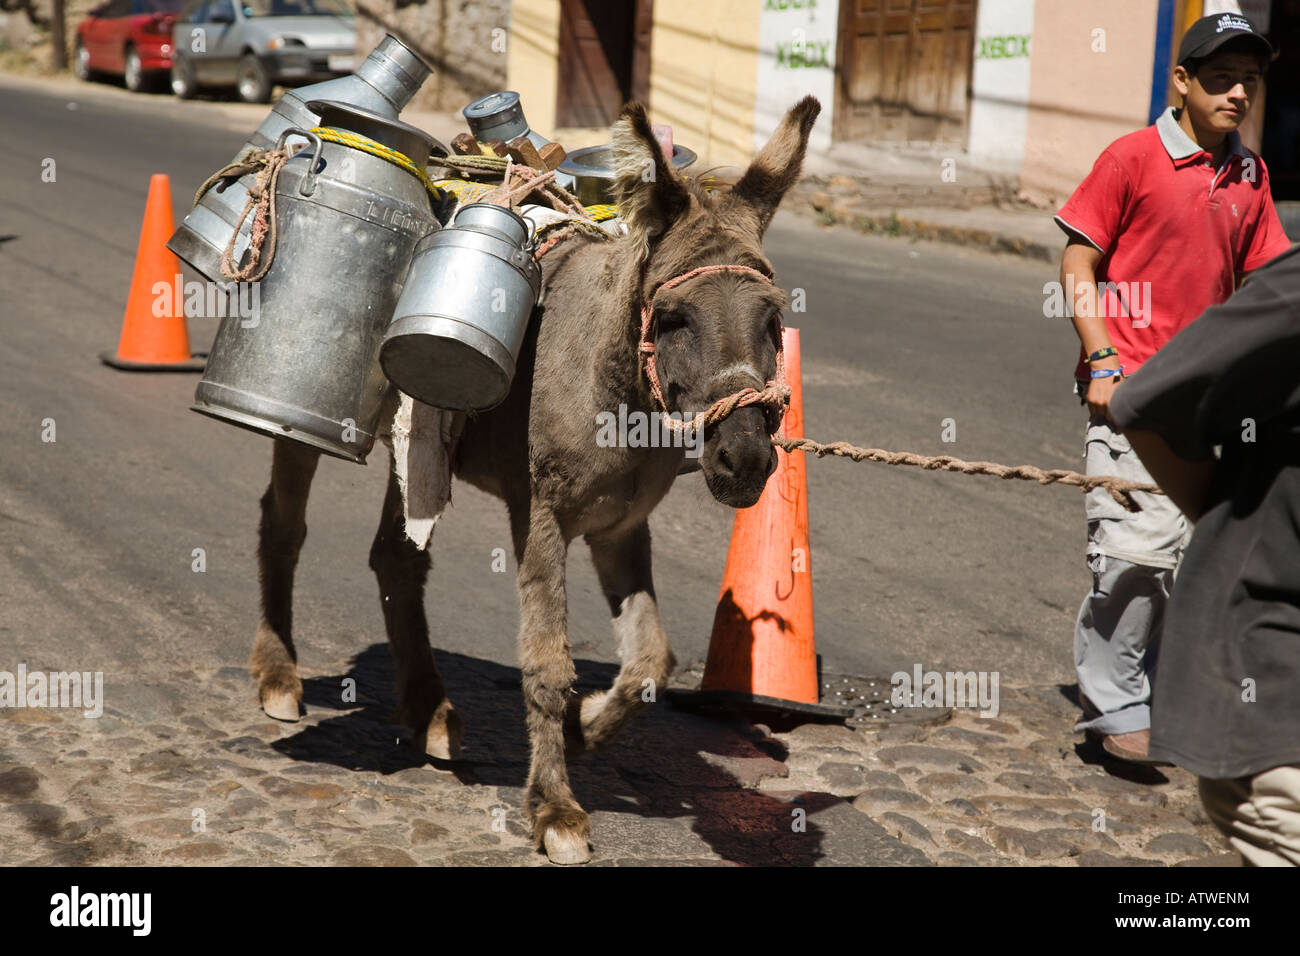 MEXICO Guanajuato Adult male leading burro with metal canisters tied to back down city street making deliveries Stock Photo